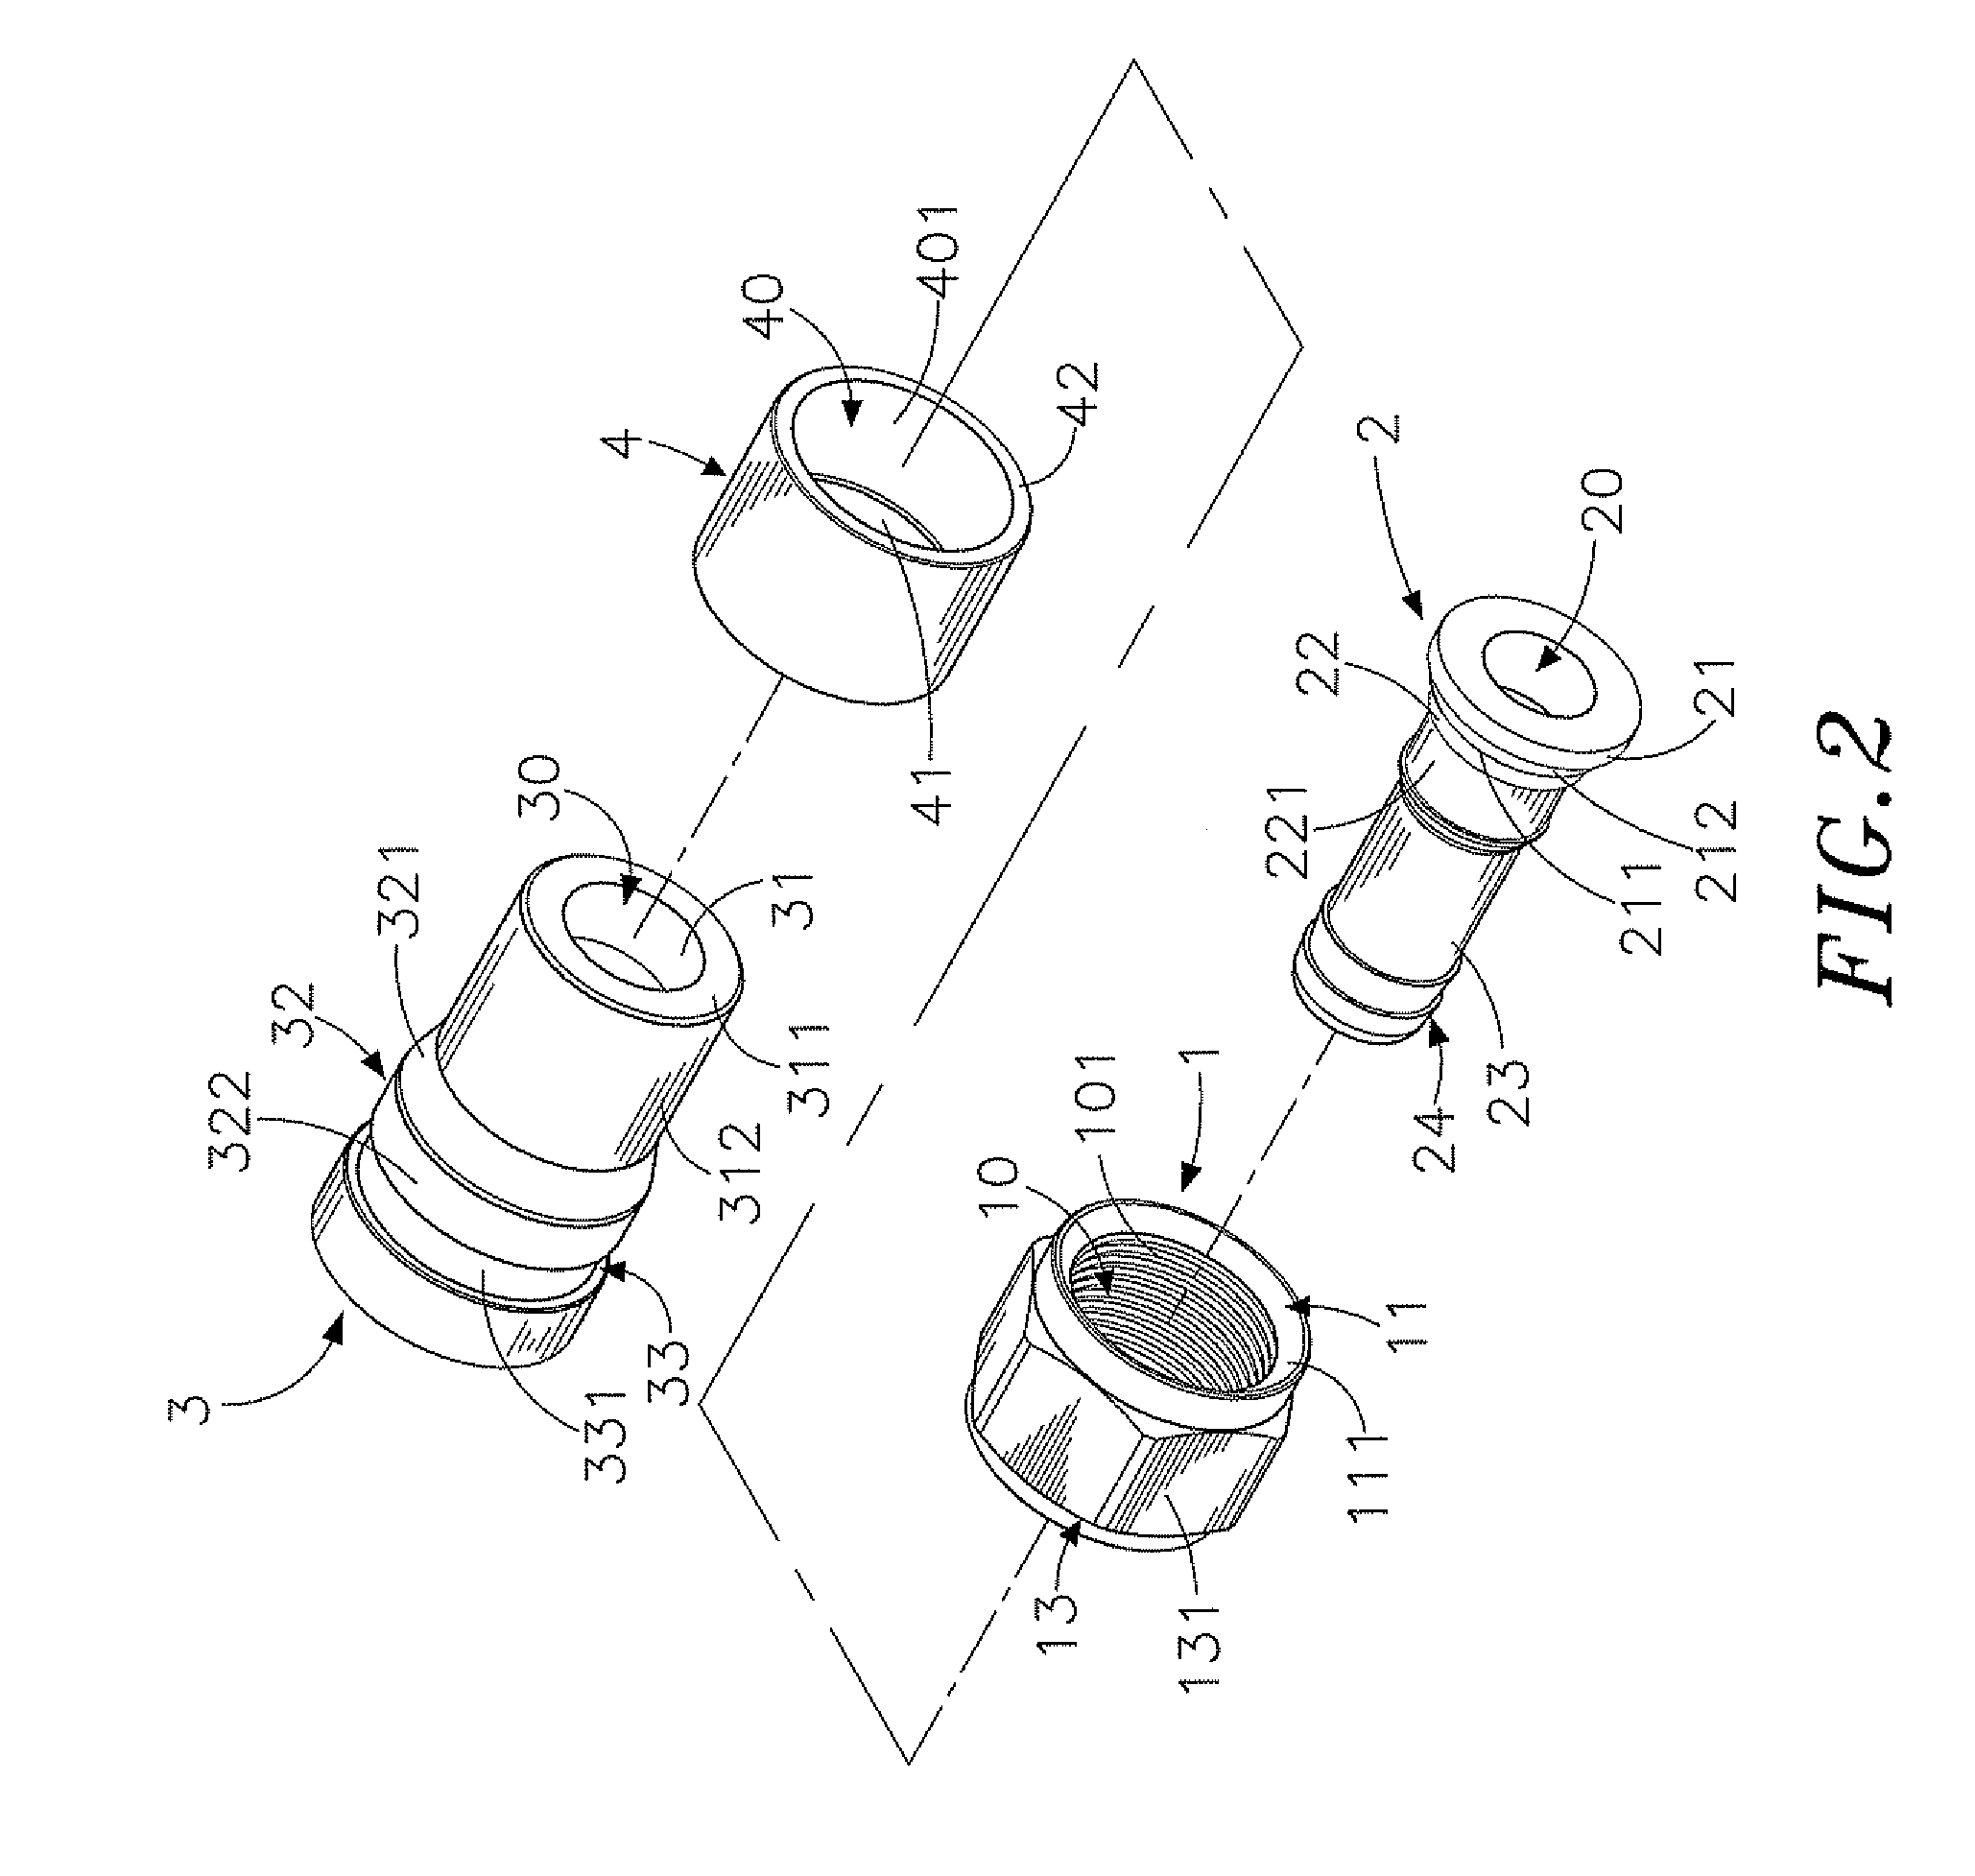 Electrical signal connector having a locknut, core tube, elastic cylindrical casing, and barrel for quick connection with a coaxial cable